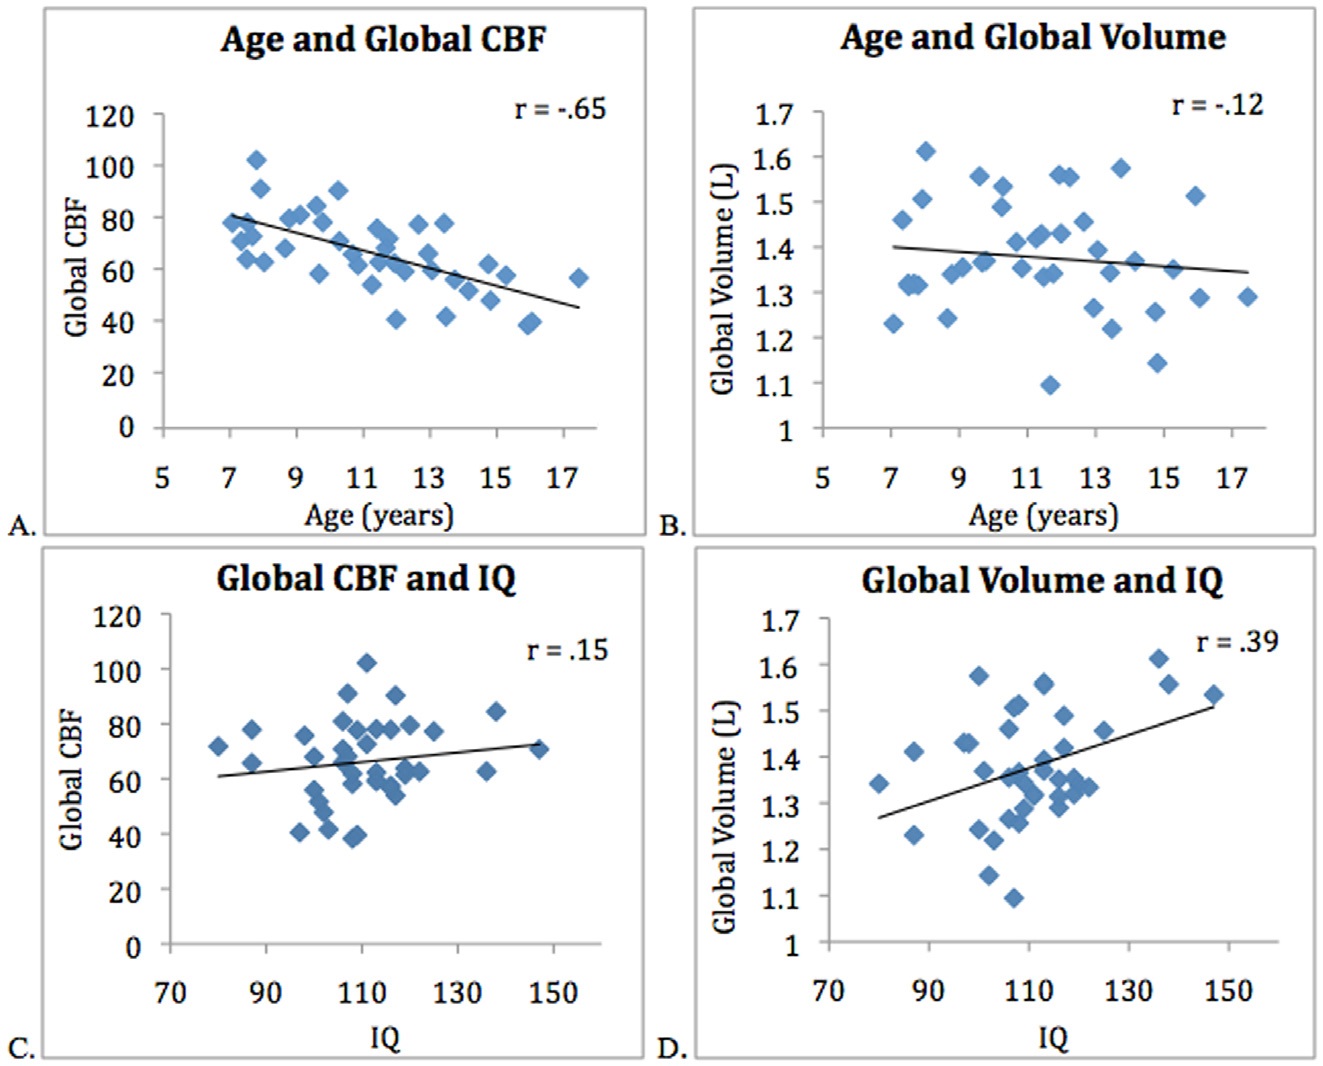 (A) Negative correlation between age and global CBF (r = -.65, p < .000). (B) Age and Global VBM, no significant relationship (r = -.12, p < .466). (C) No correlation observed between CBF and Full Scale IQ (r = .15, p = .362) (D) Positive correlation between total brain volume and Full Scale IQ (r = .39, p = .007).